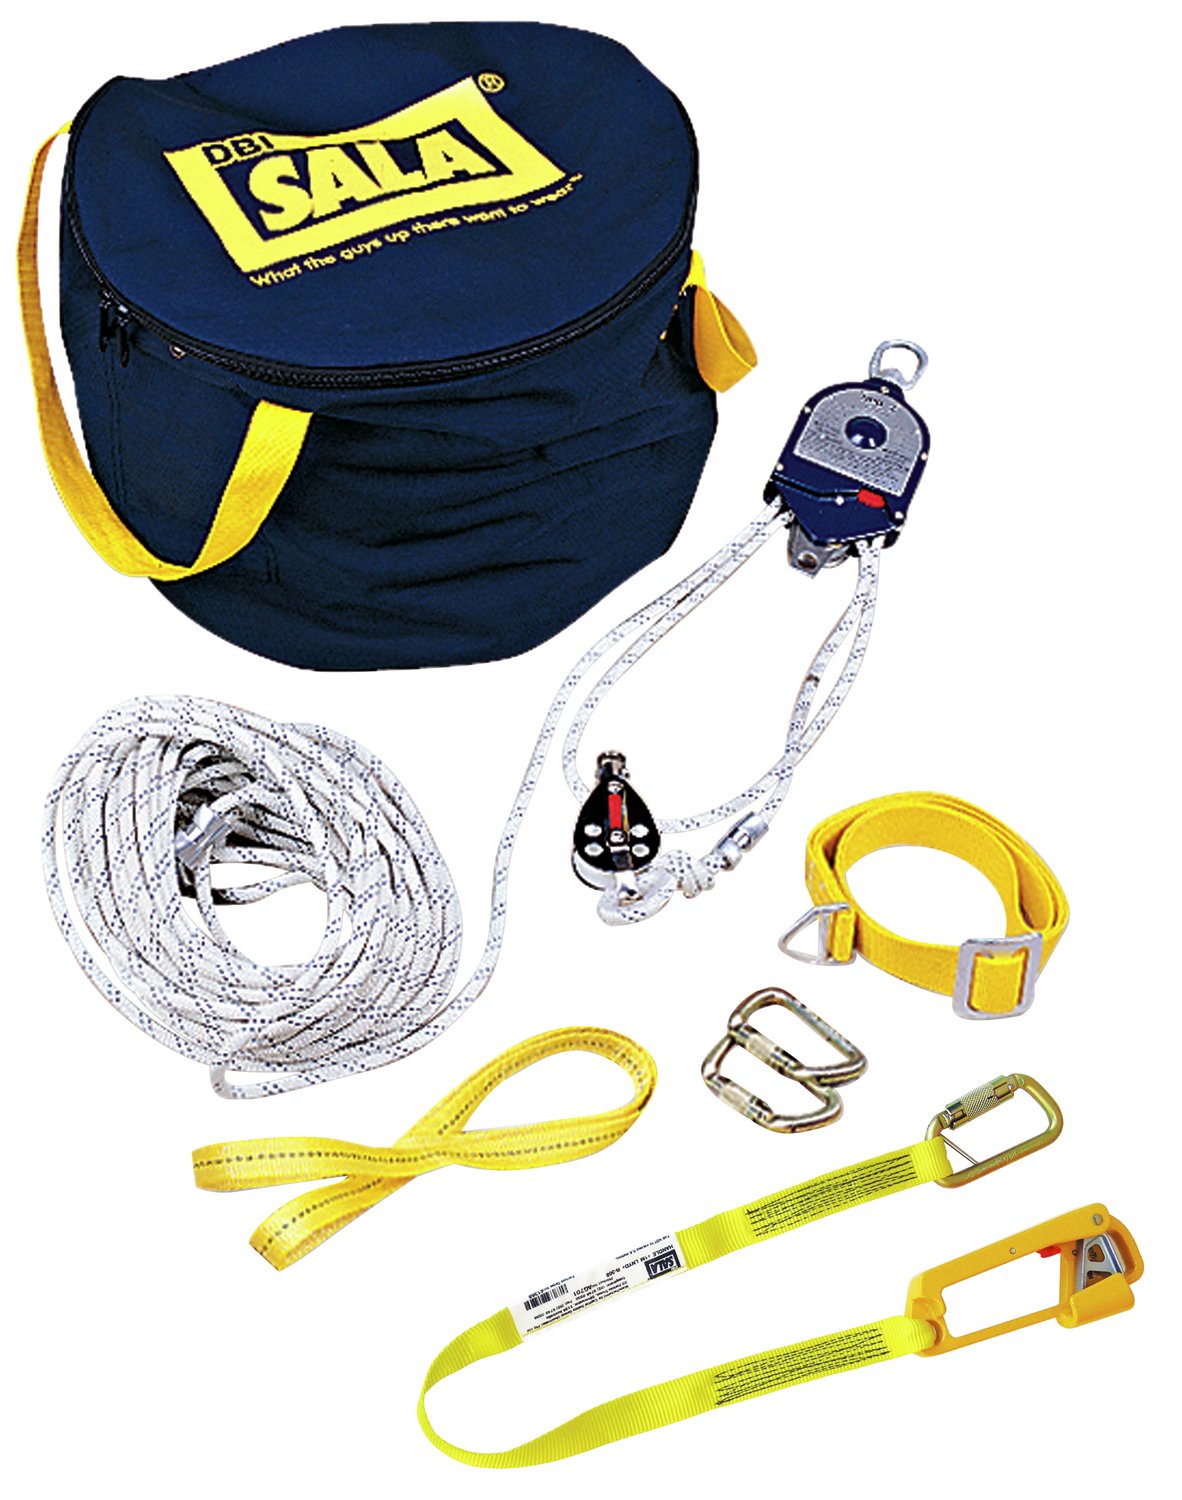 7012819475 - 3M DBI-SALA Rollgliss RPD 3:1 Ratio Rescue Positioning Device Kit 3600400, 3/8 in Nylon Kernmantle Rope, 400 ft